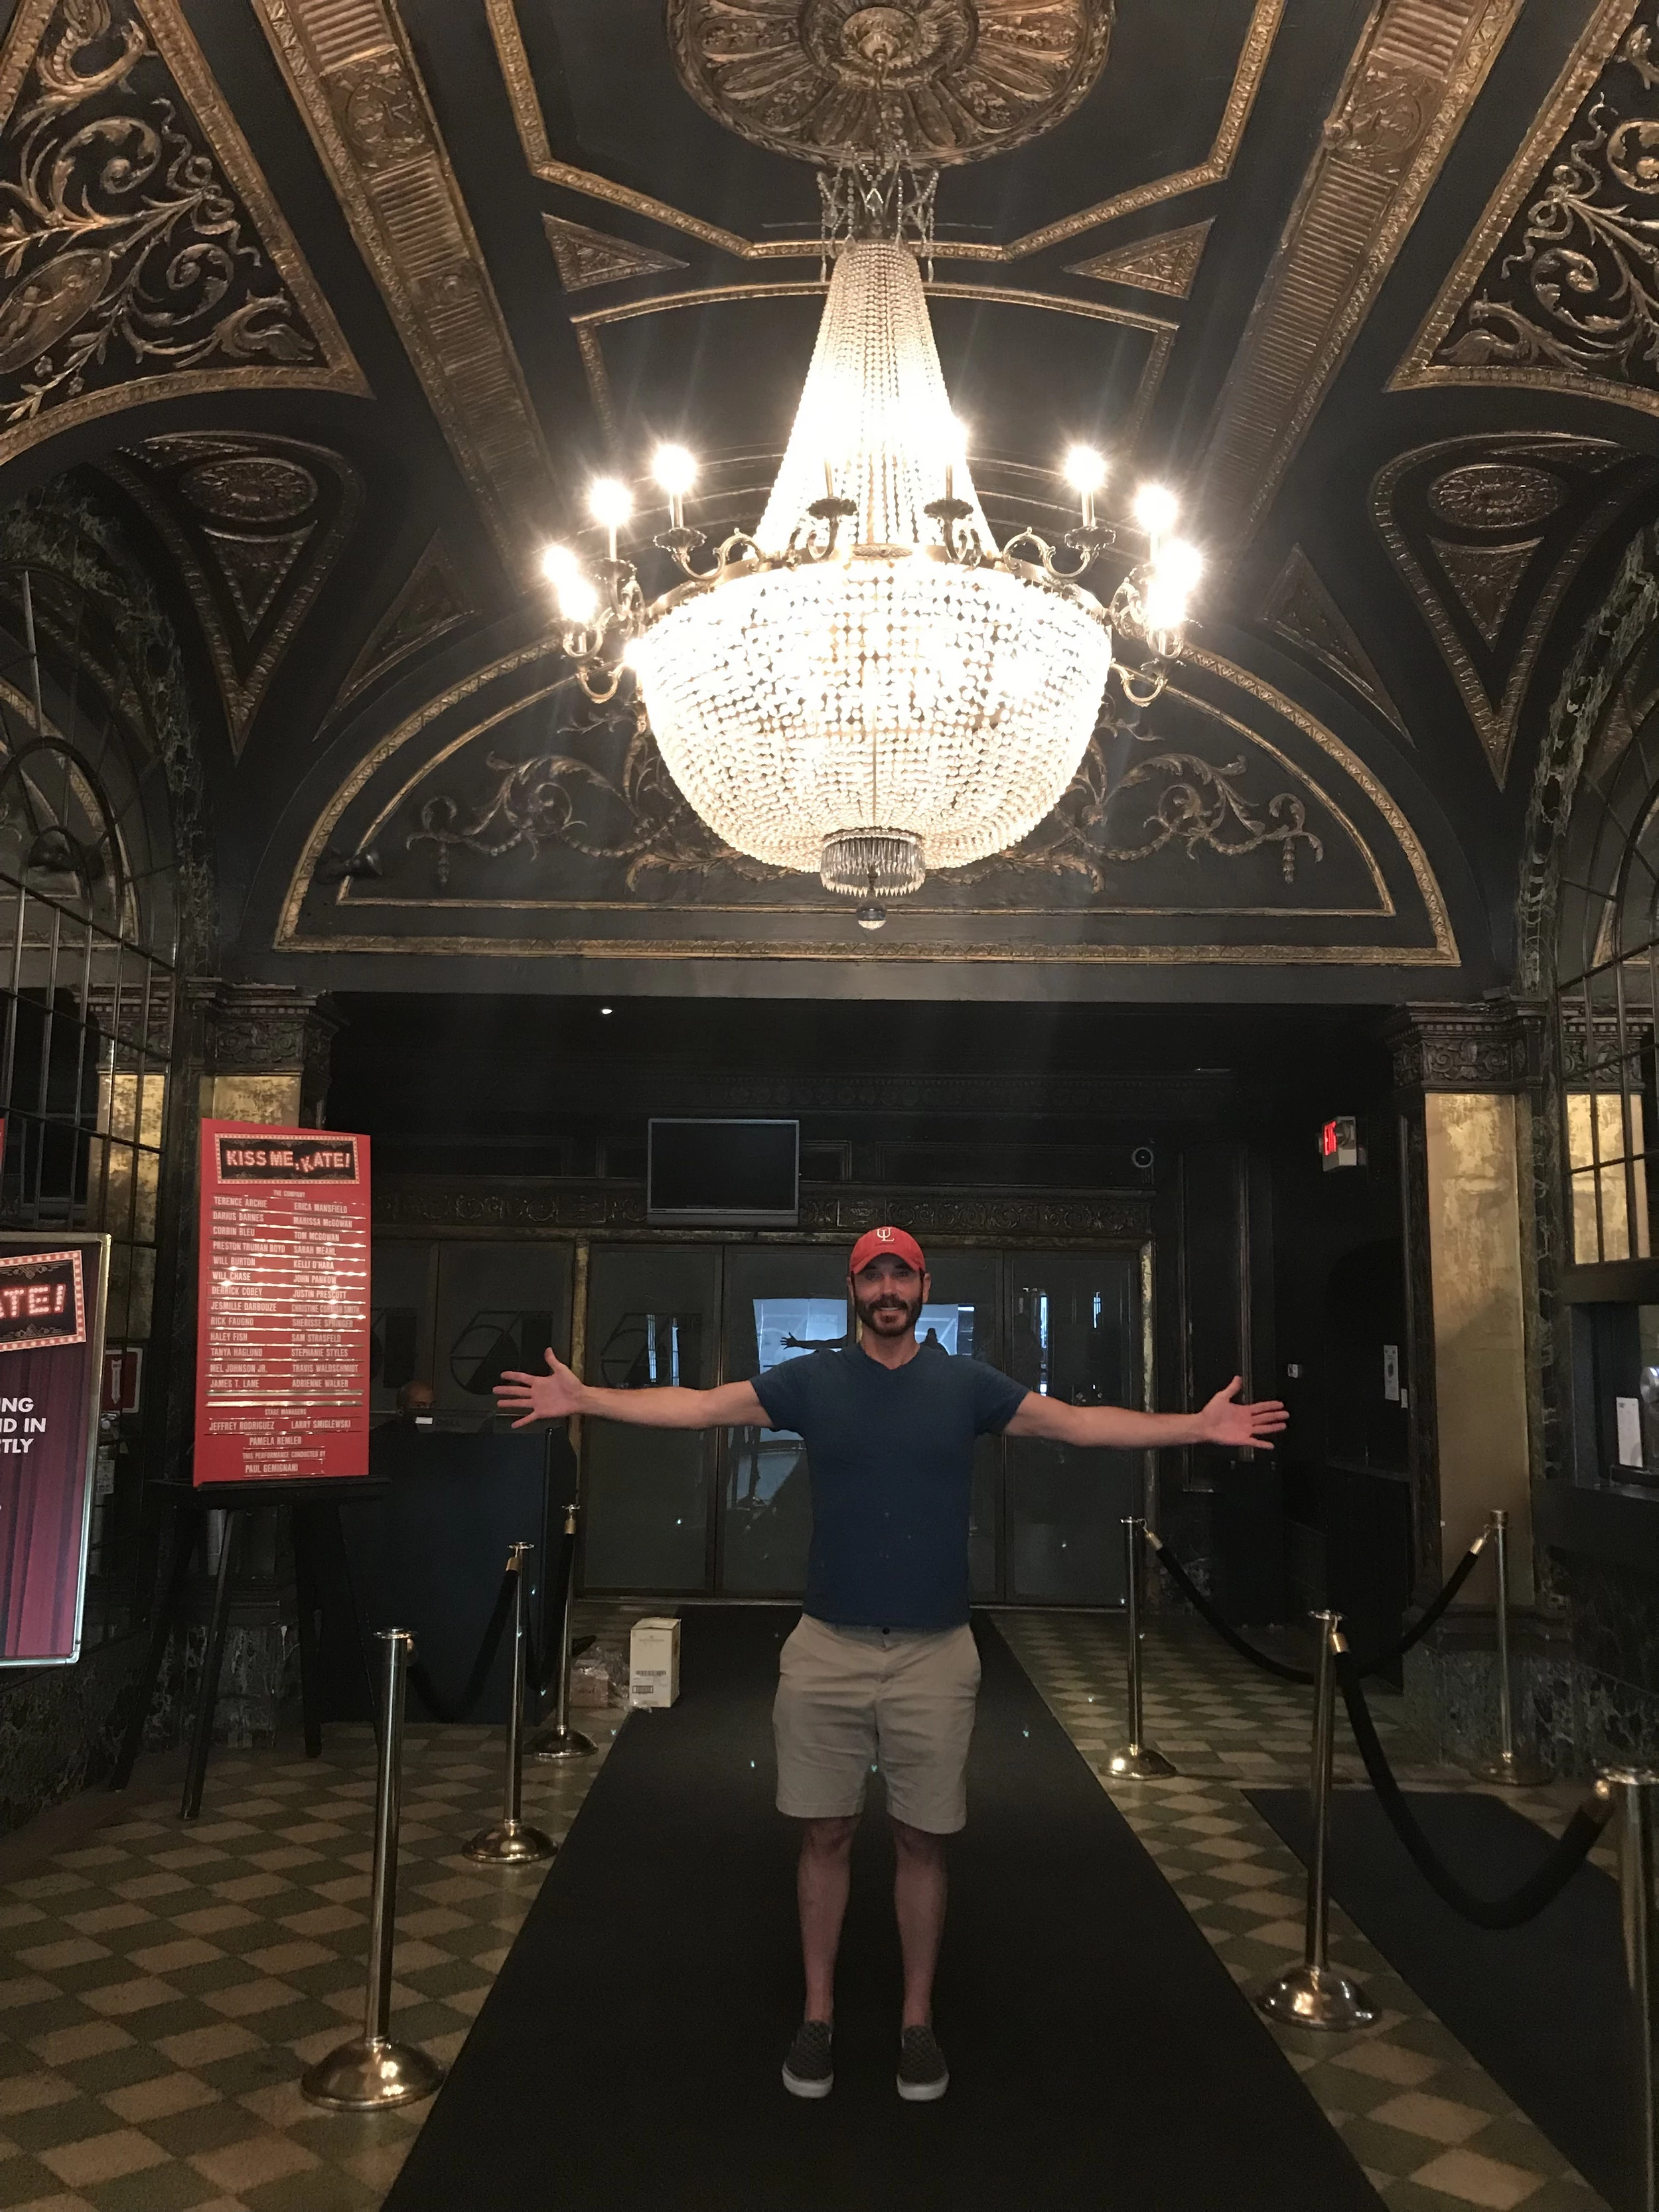 I Visited The Famed Studio 54 In NYC Last Week, Mind Blown